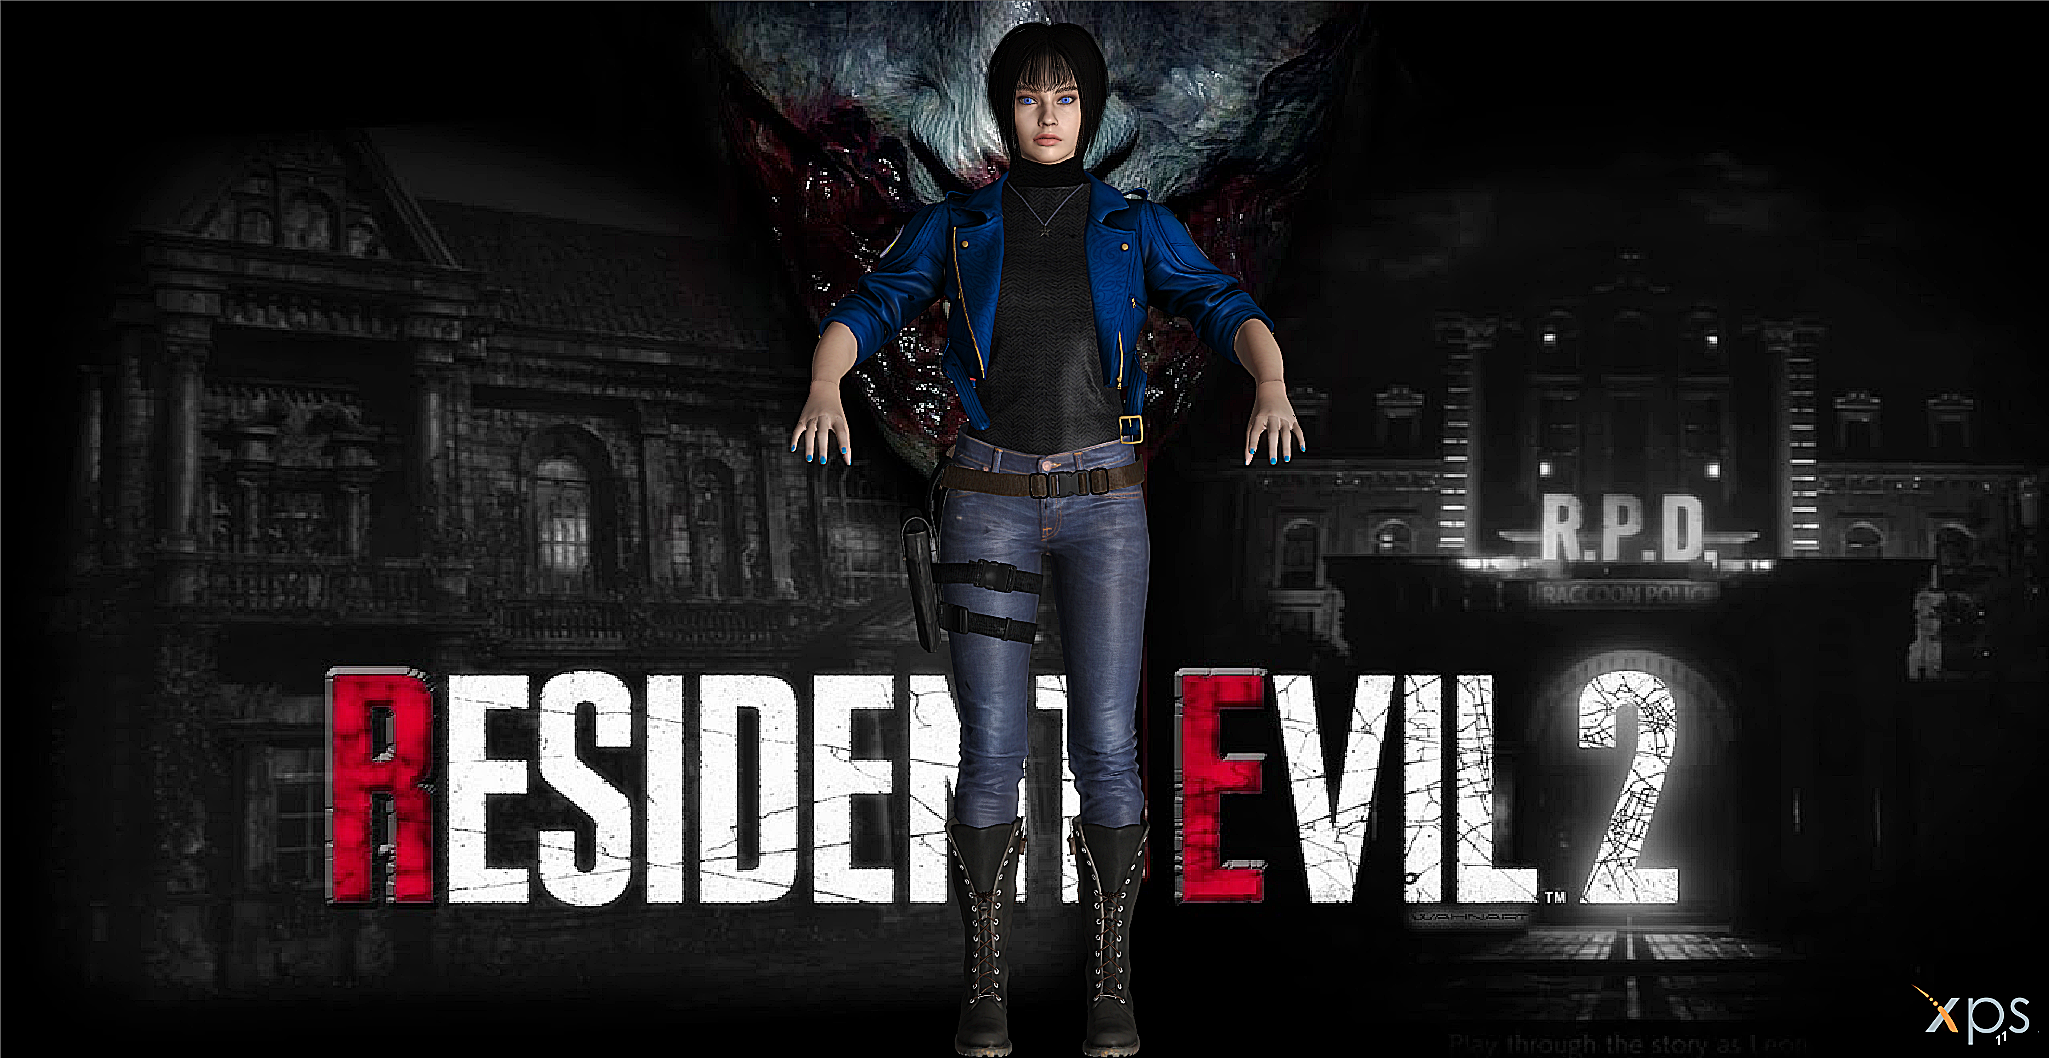 Claire Cosplaying Jill Valentine Mod - Resident Evil 2 Remake 